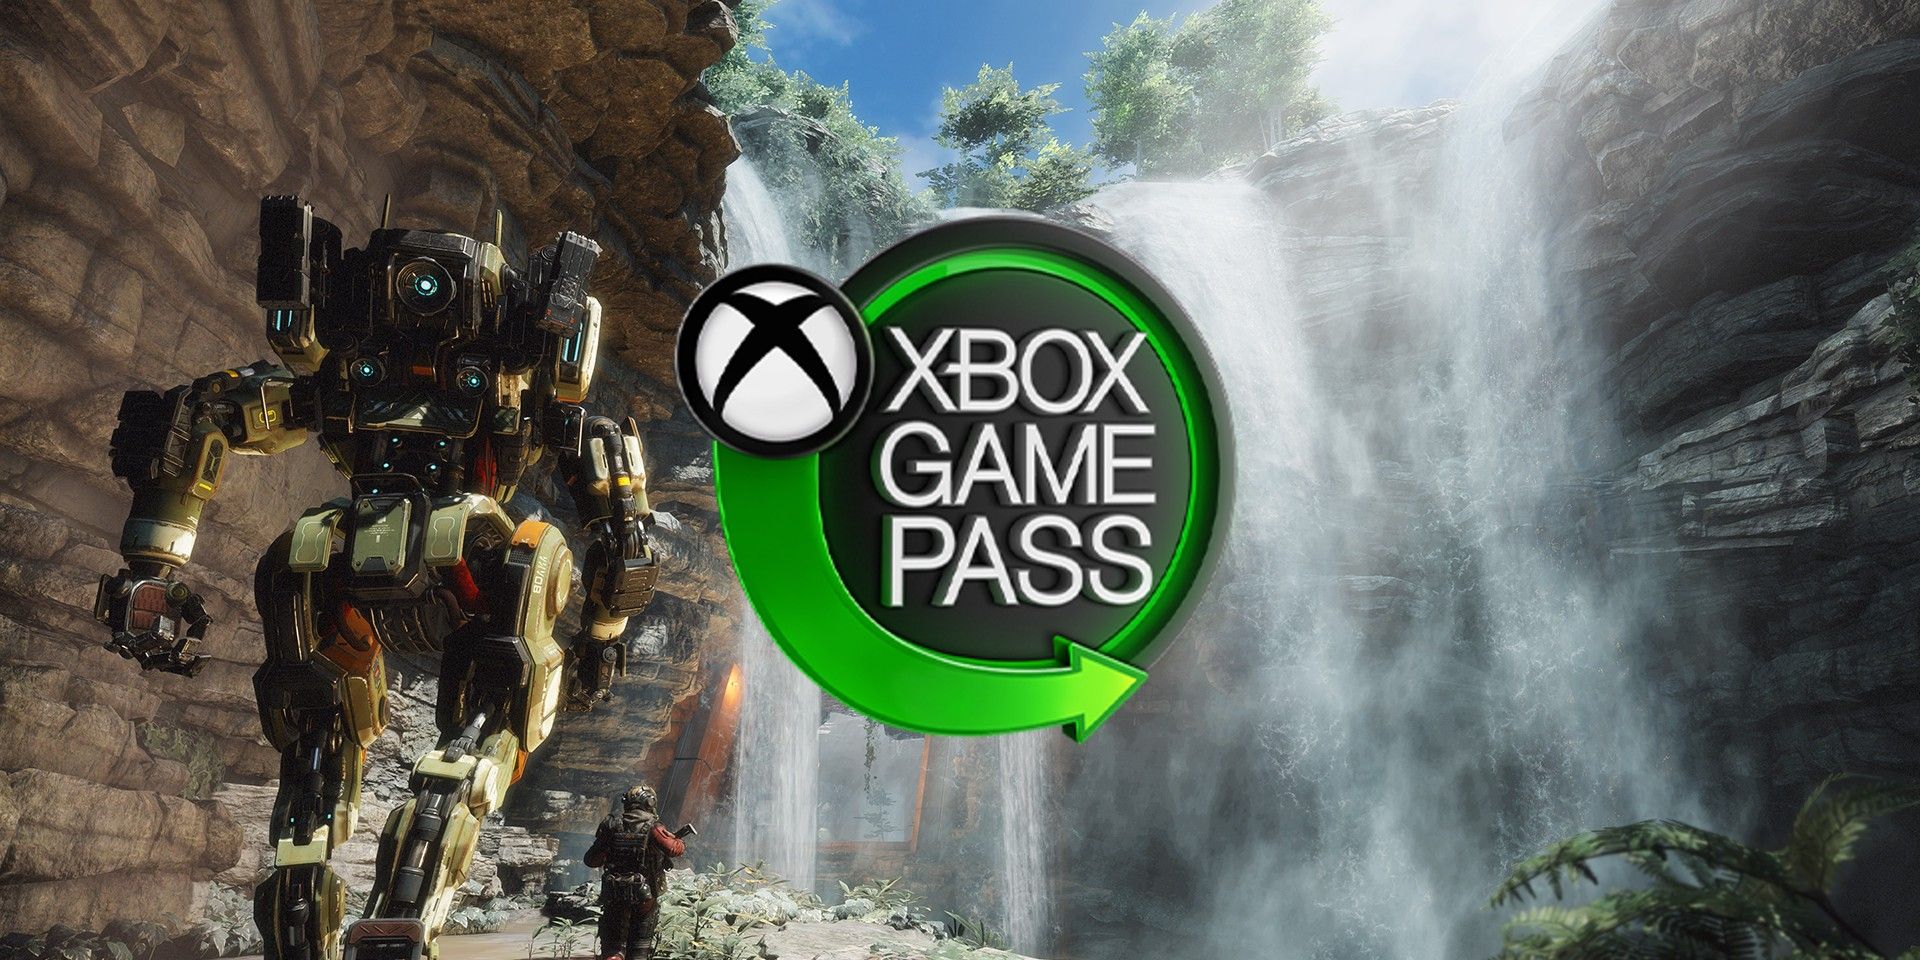 EA Play joins Game Pass for PC with official launch - 9to5Toys